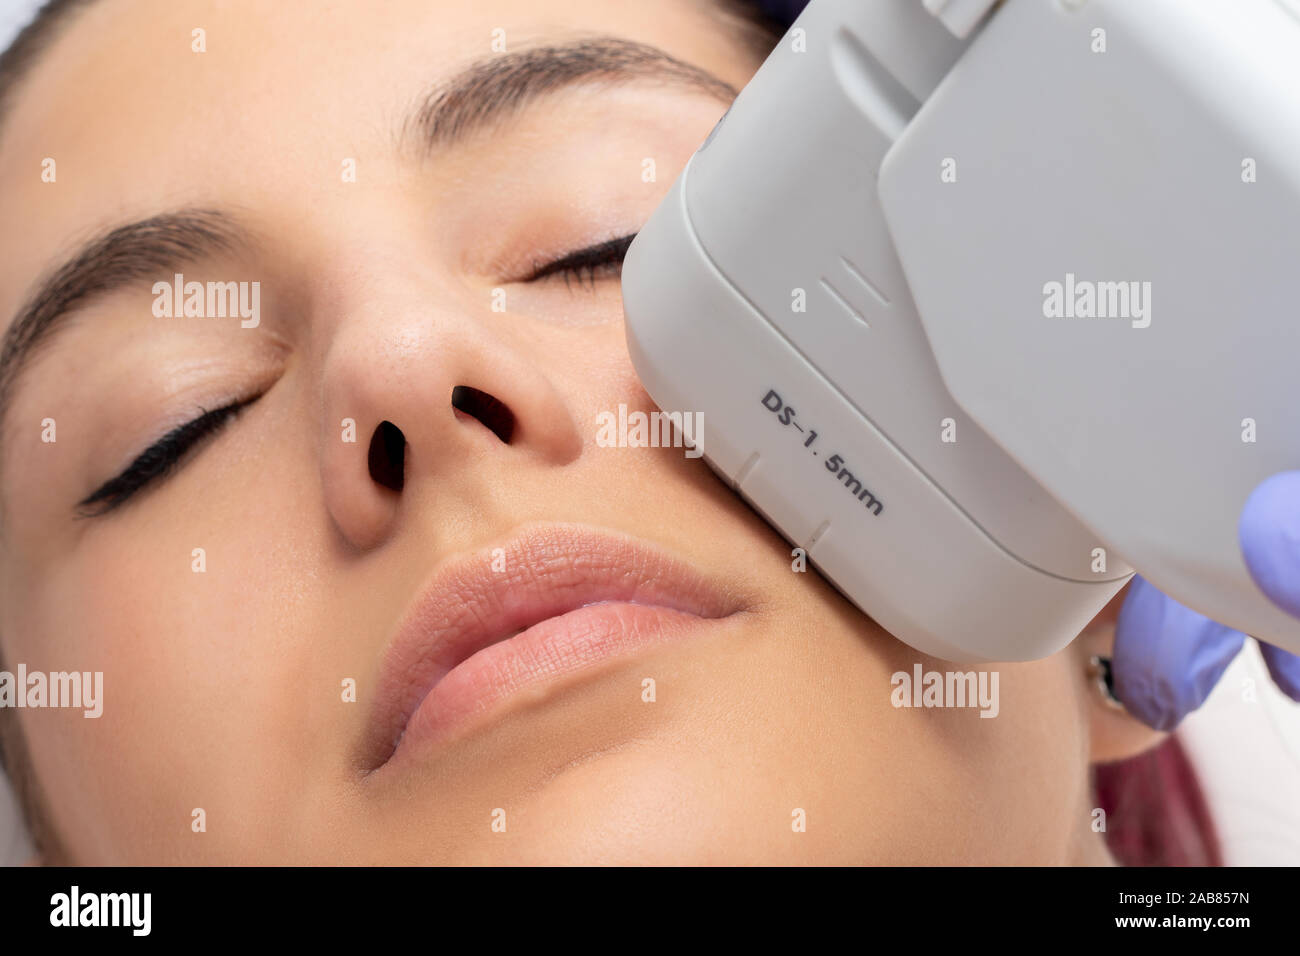 Woman receiving high intensity focused ultrasound treatment on face. Therapist doing cosmetic plasma lift on cheek with ultrasonic device. Stock Photo